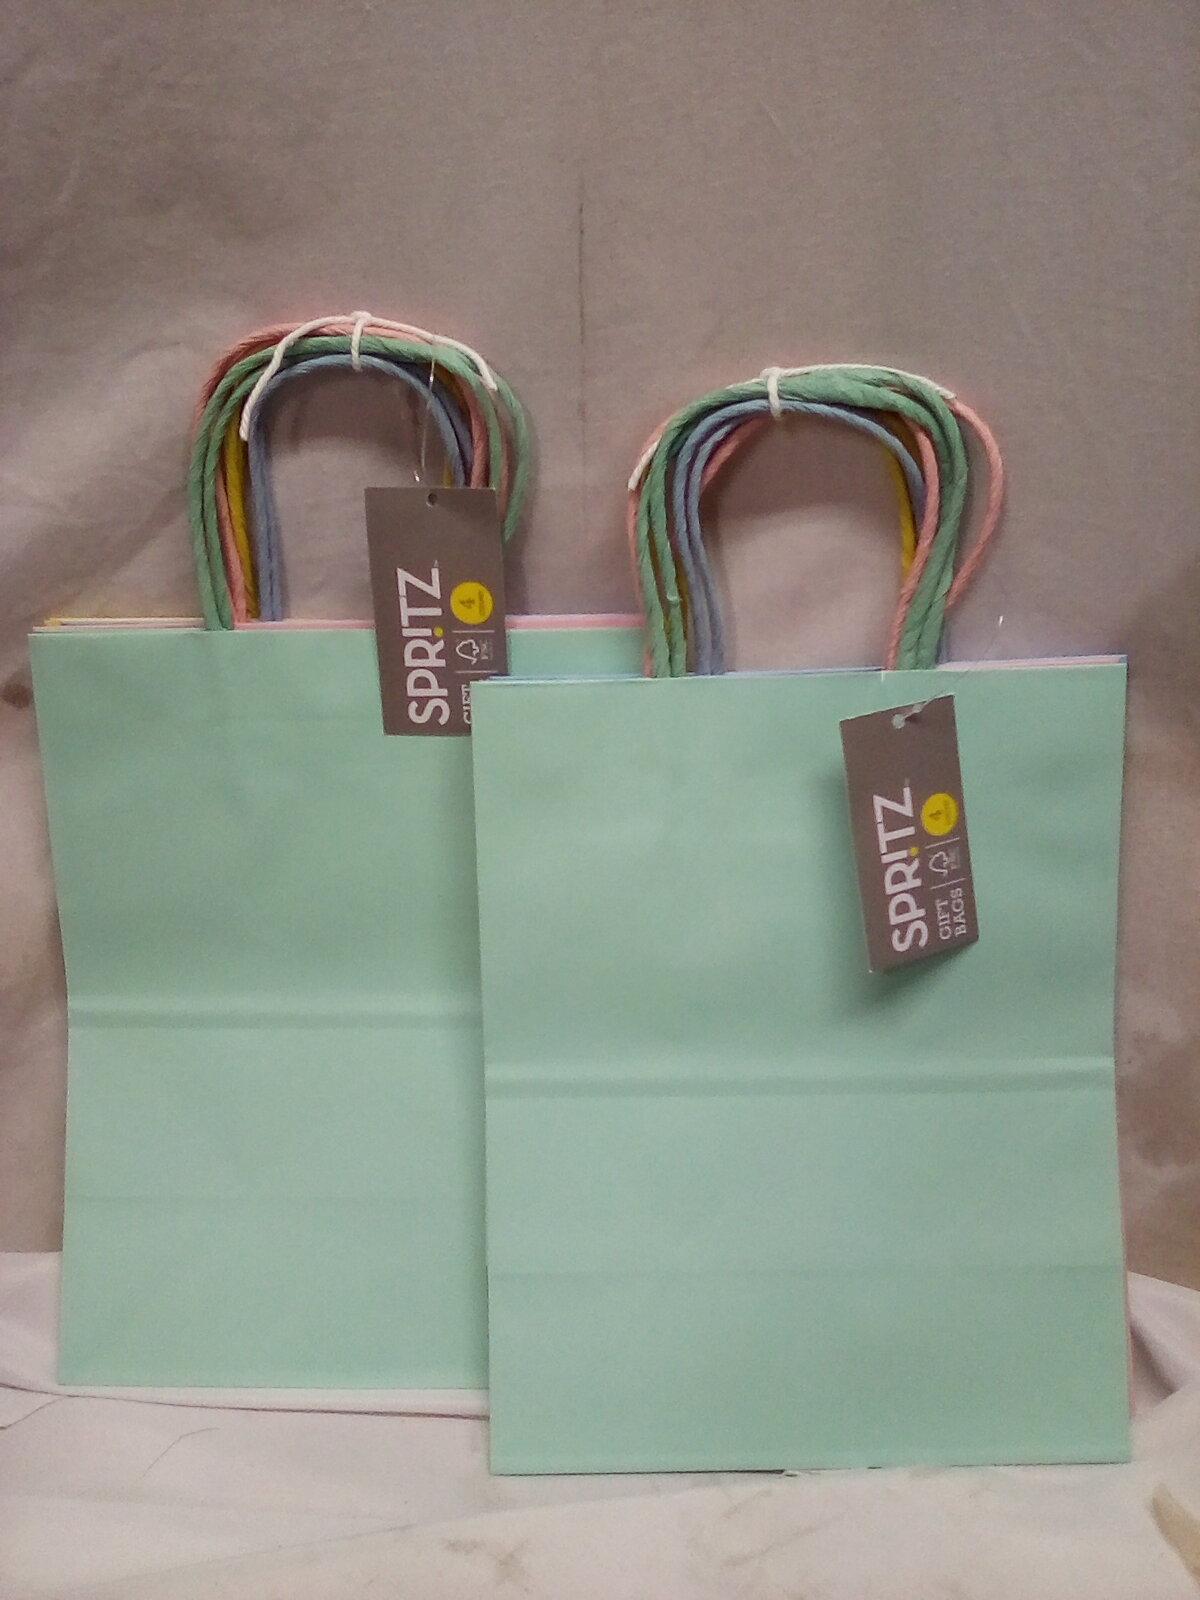 Spritz Gift Bags 4 Count. Qty 2.